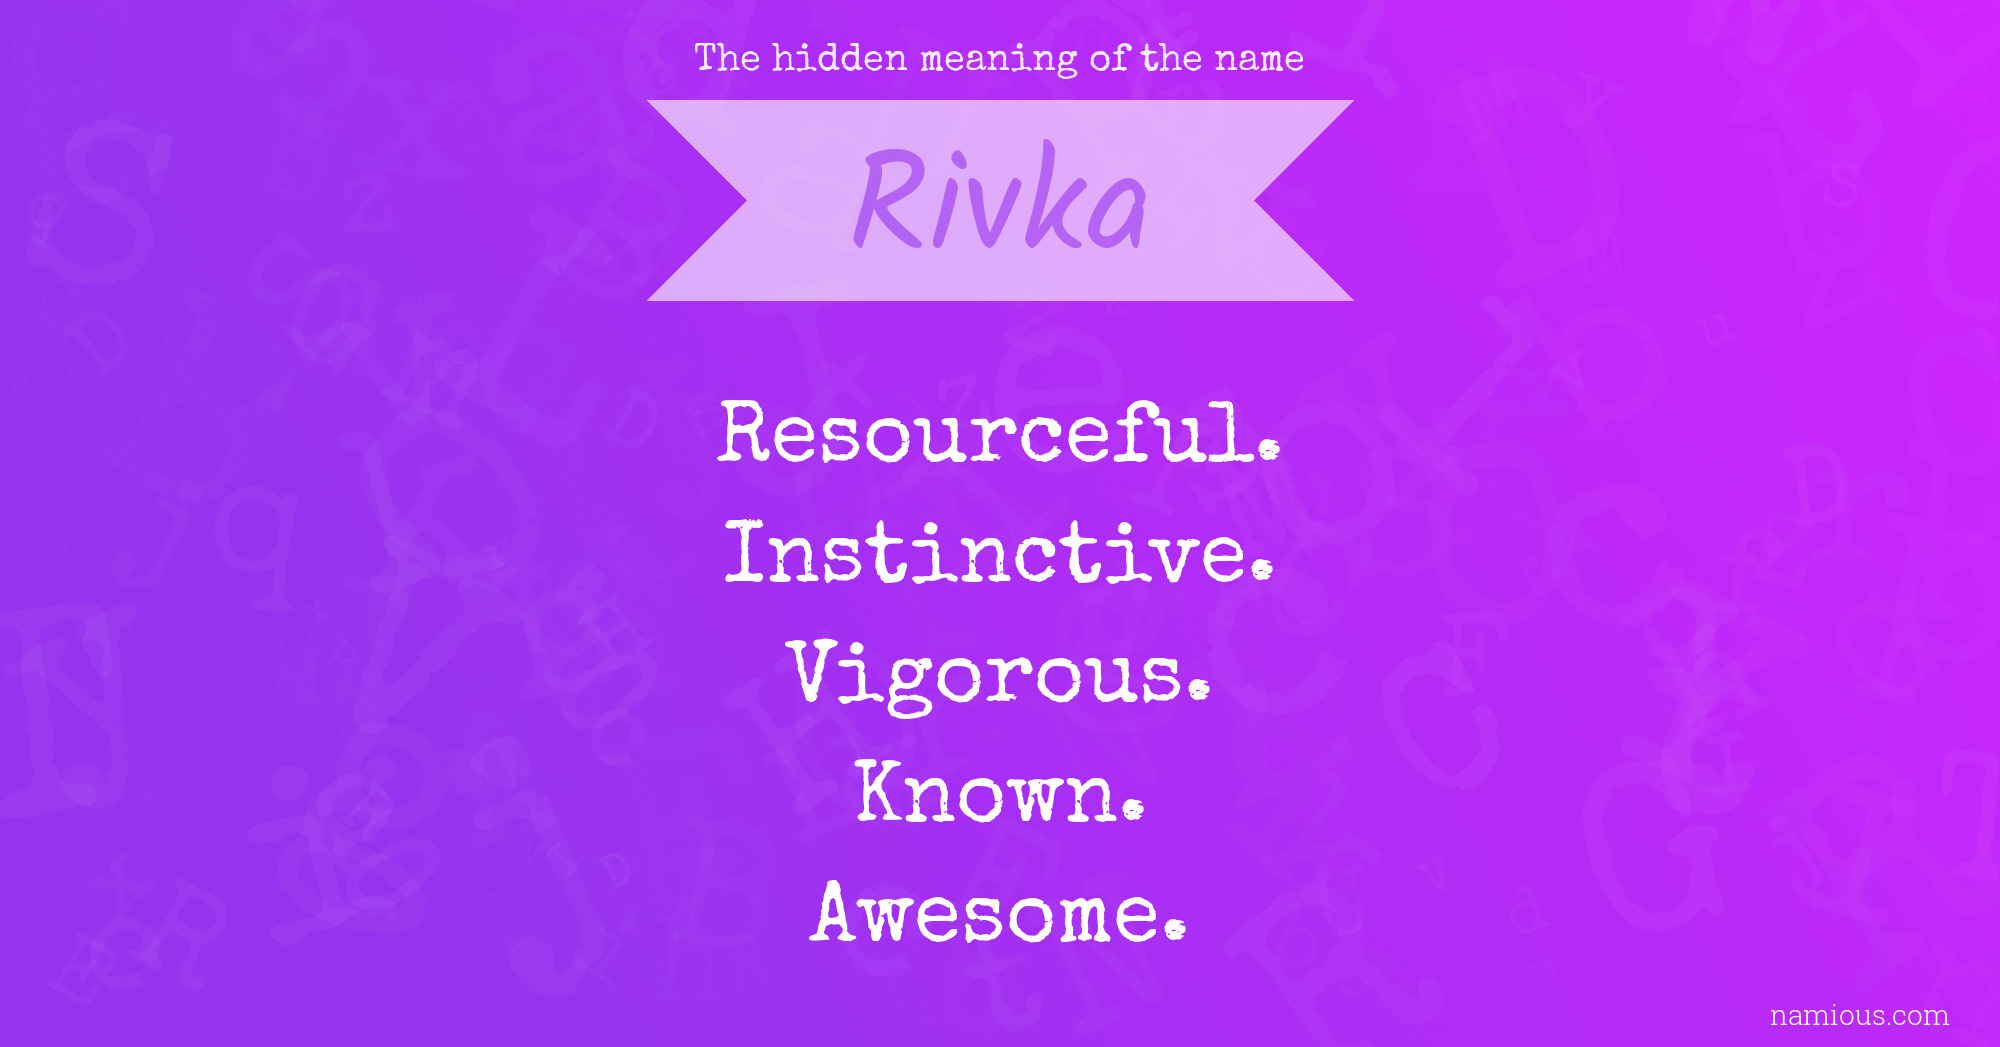 The hidden meaning of the name Rivka